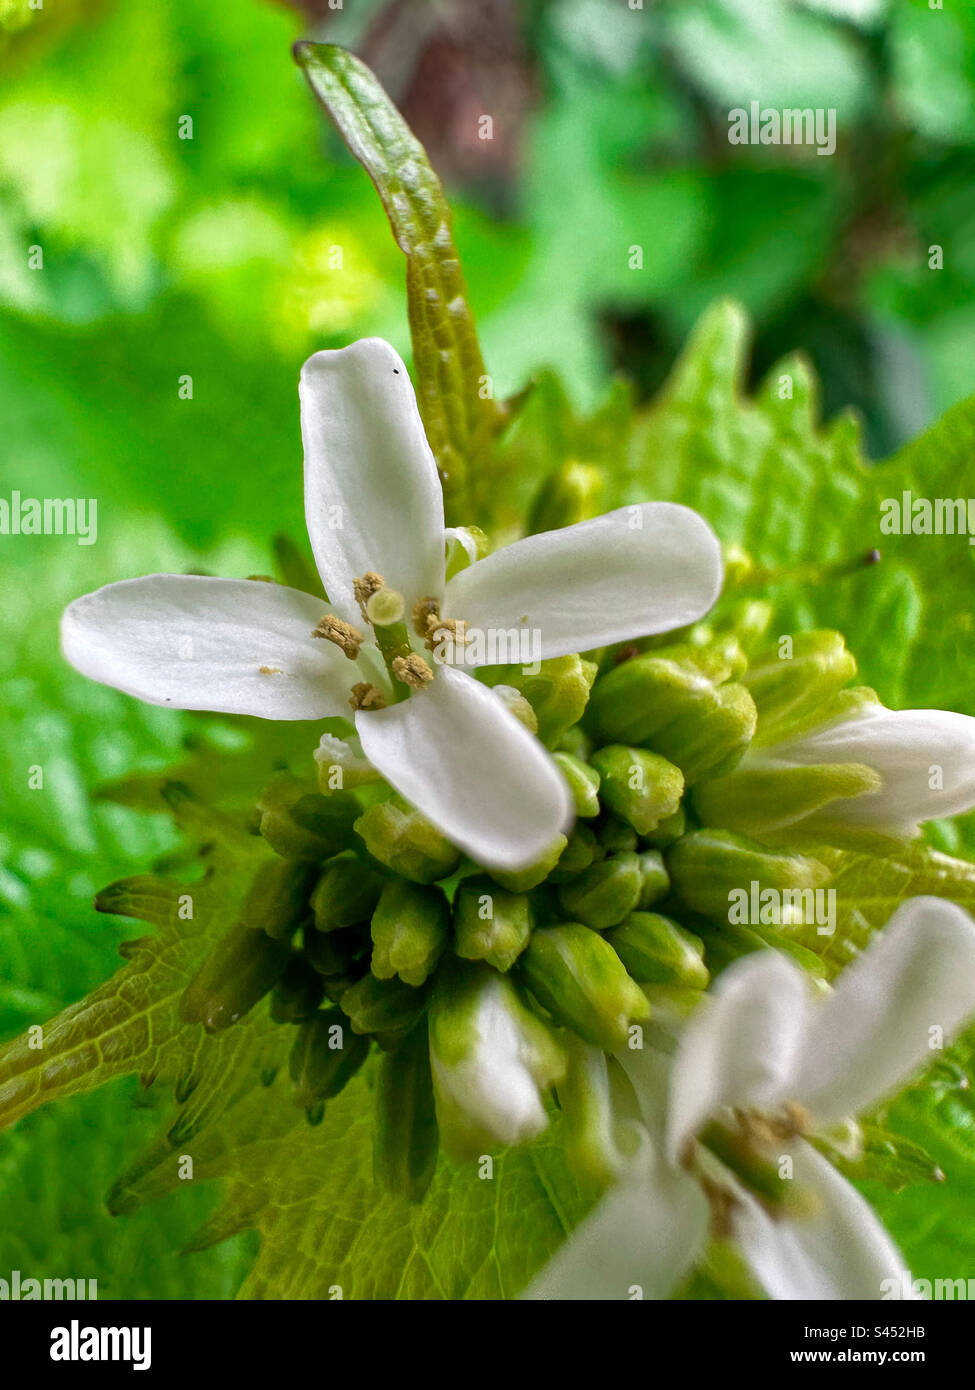 Close up shot of a white garlic mustard flower and buds, Alliaria petiolata growing in a forest. Stock Photo